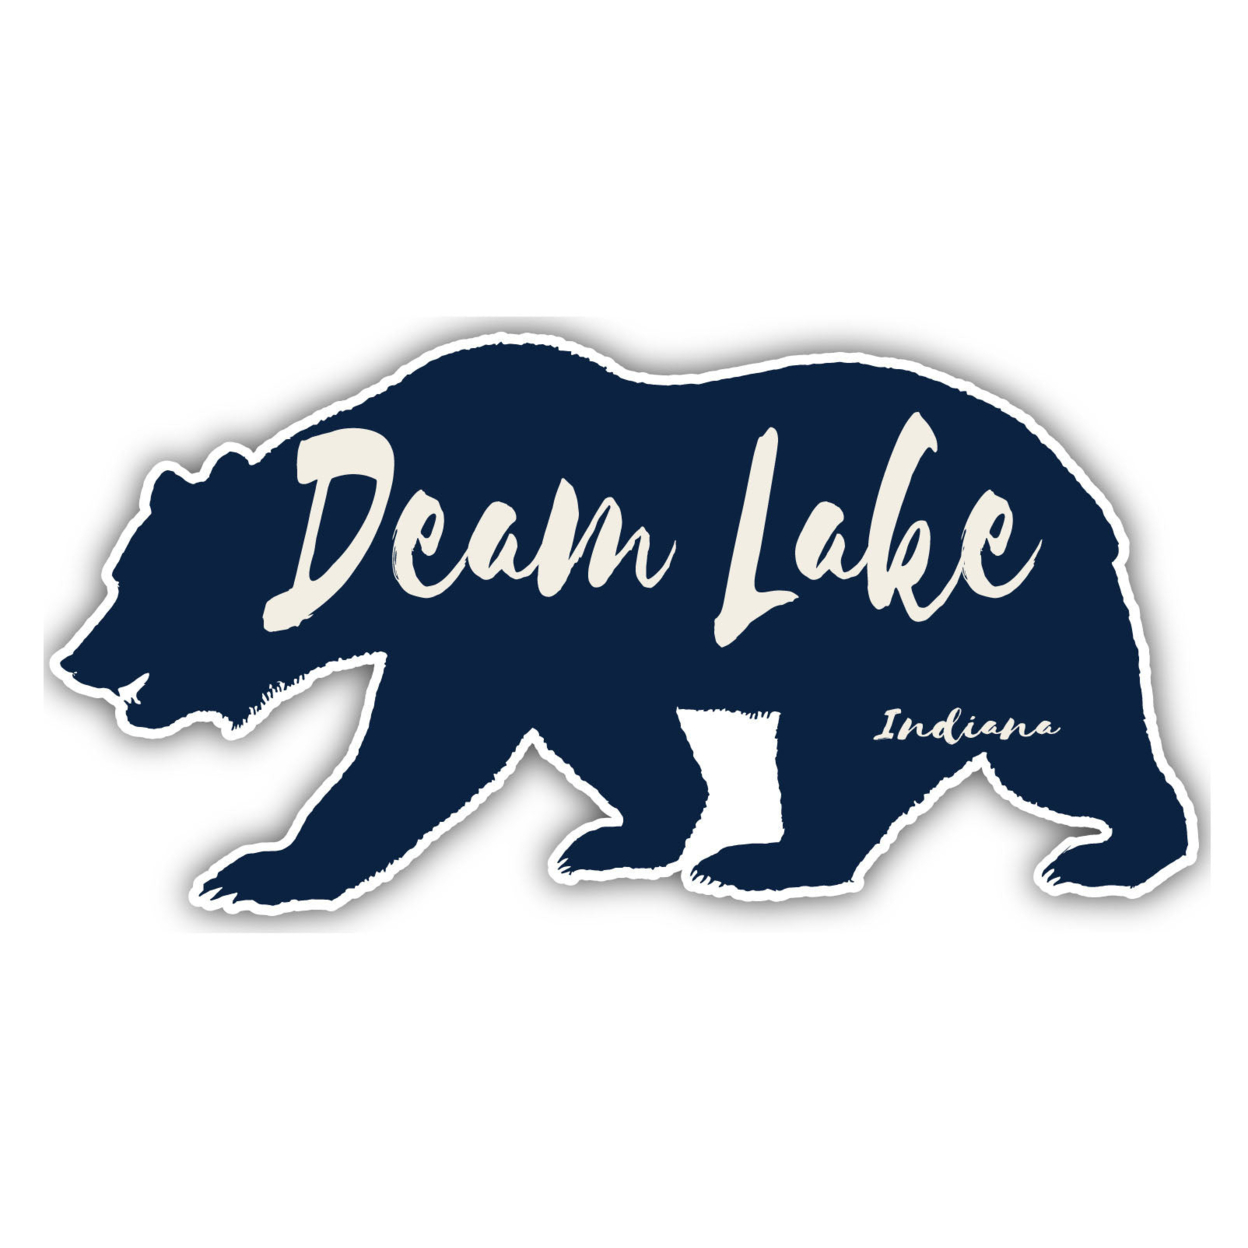 Deam Lake Indiana Souvenir Decorative Stickers (Choose Theme And Size) - 4-Pack, 12-Inch, Bear